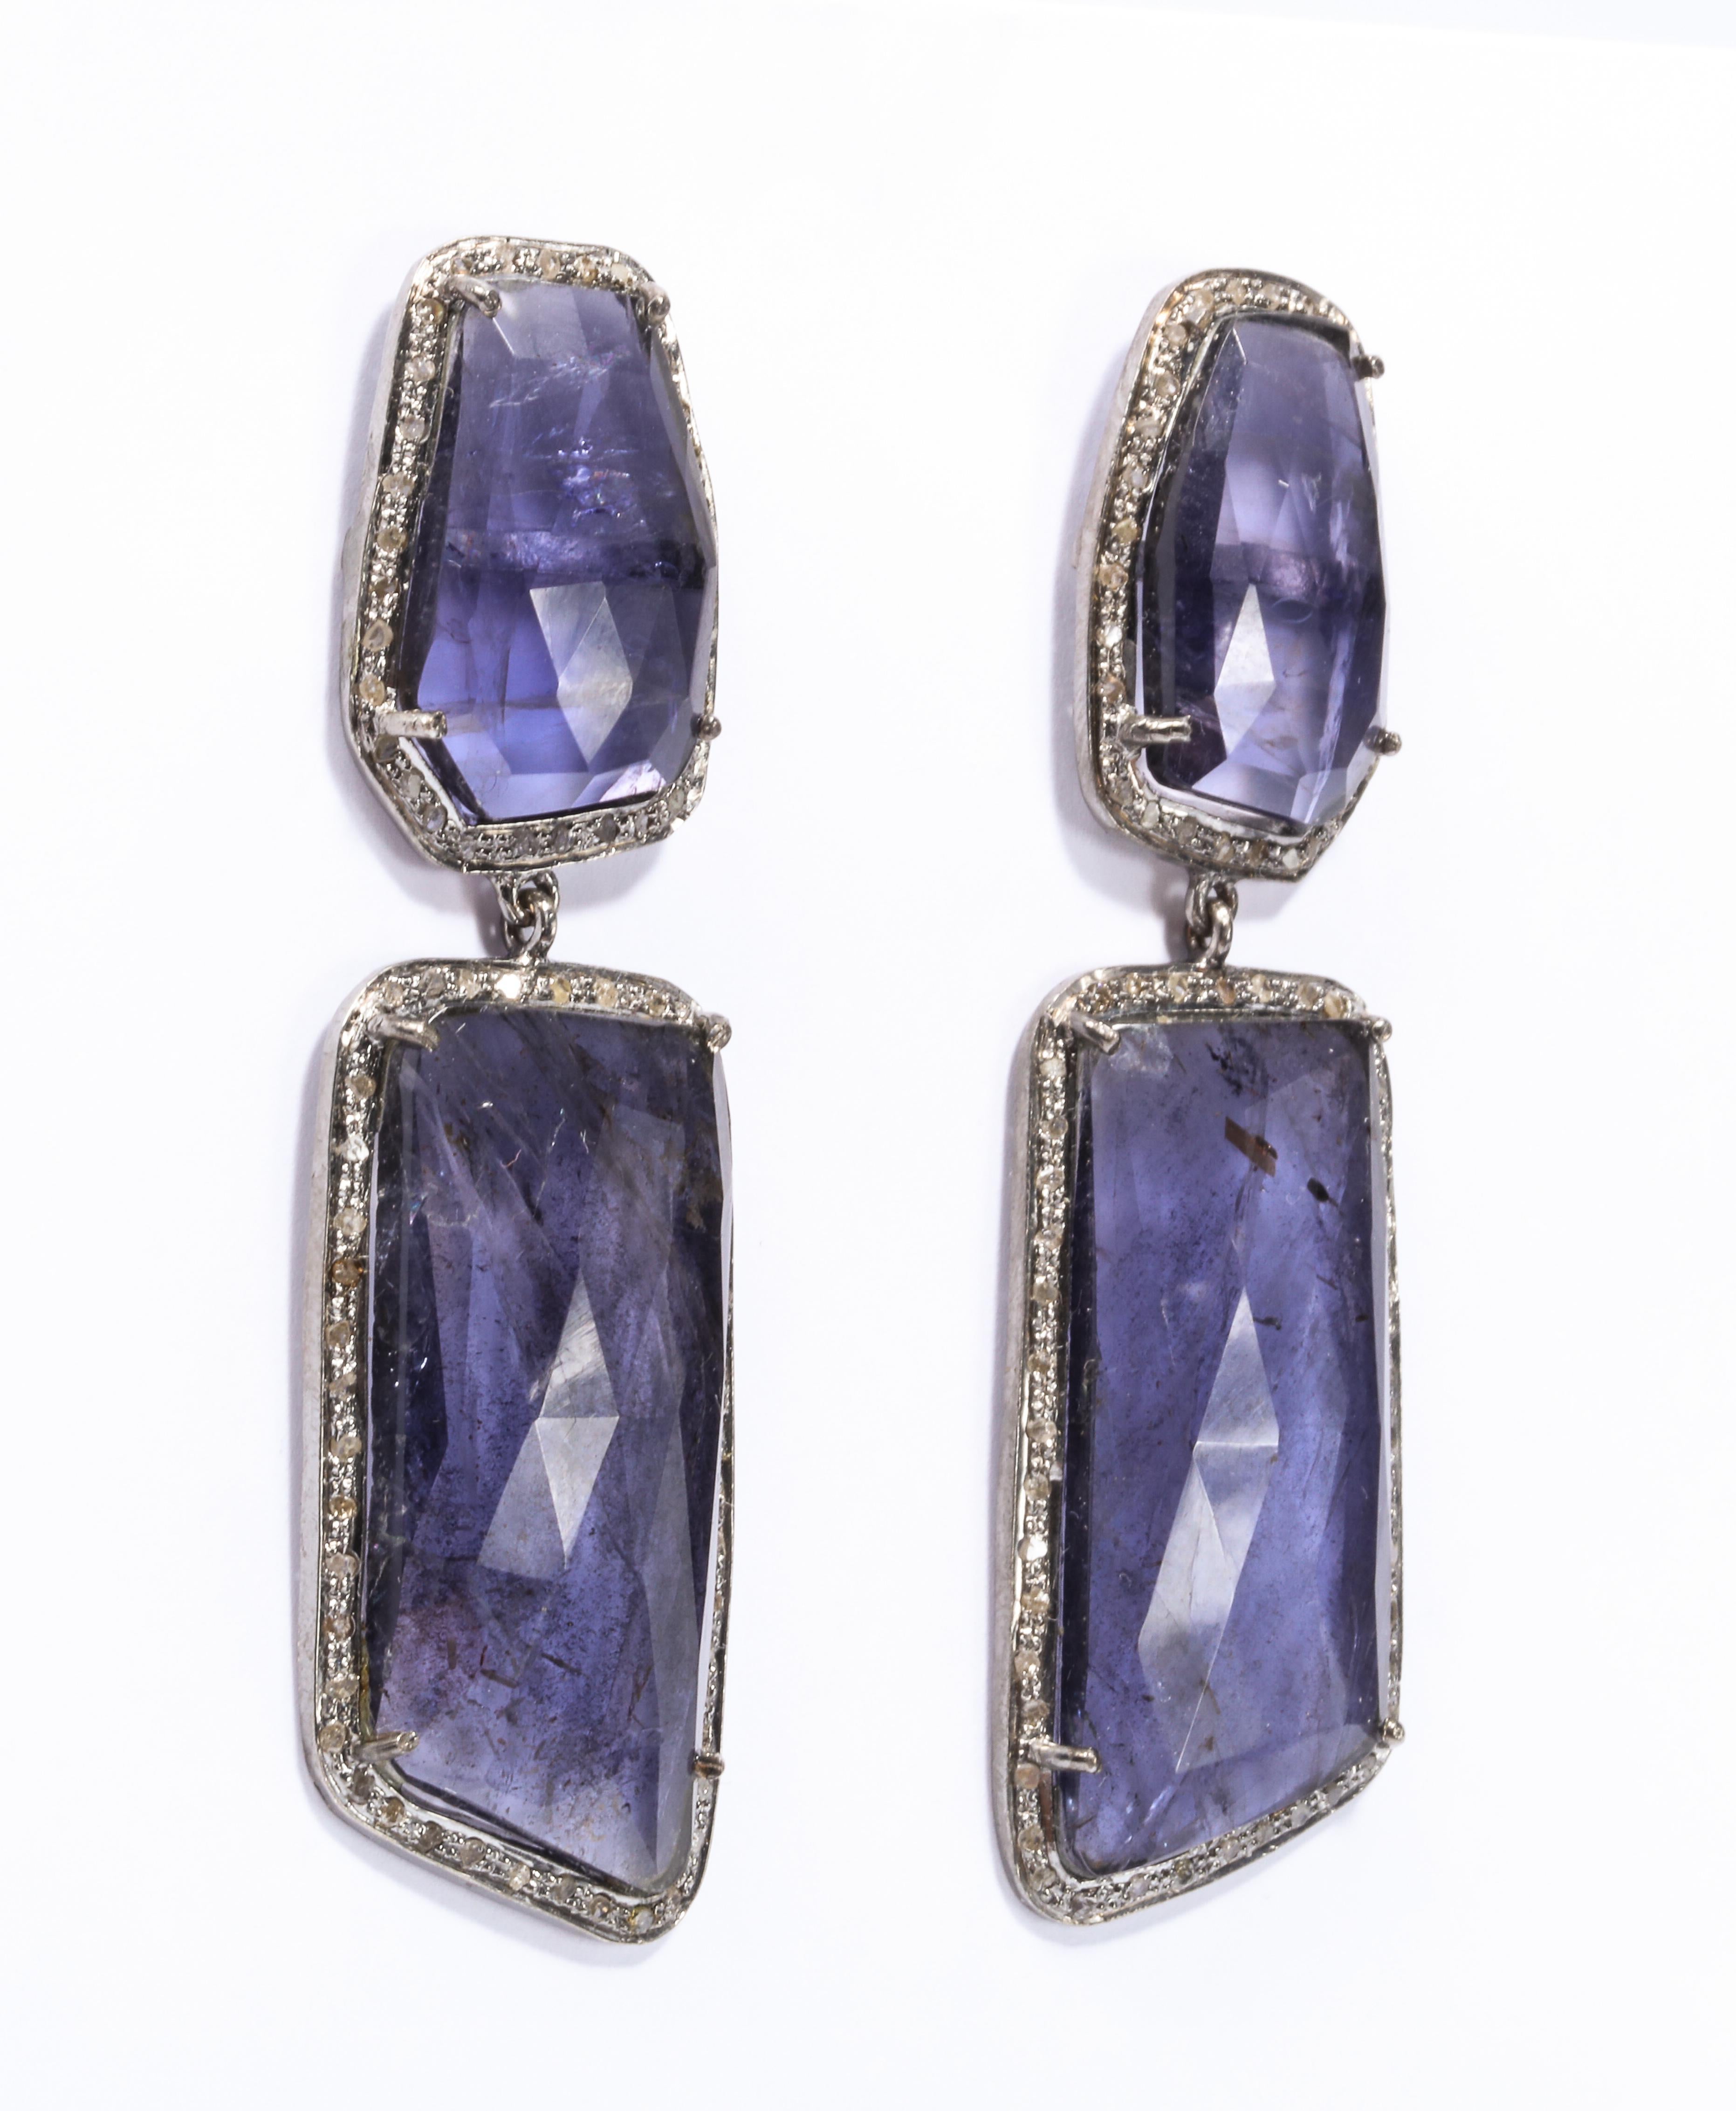 Genuine Striated Blue Kyanite Slice Diamond Antiqued Sterling Earrings
2 /14 inches long by 3/4 inches wide